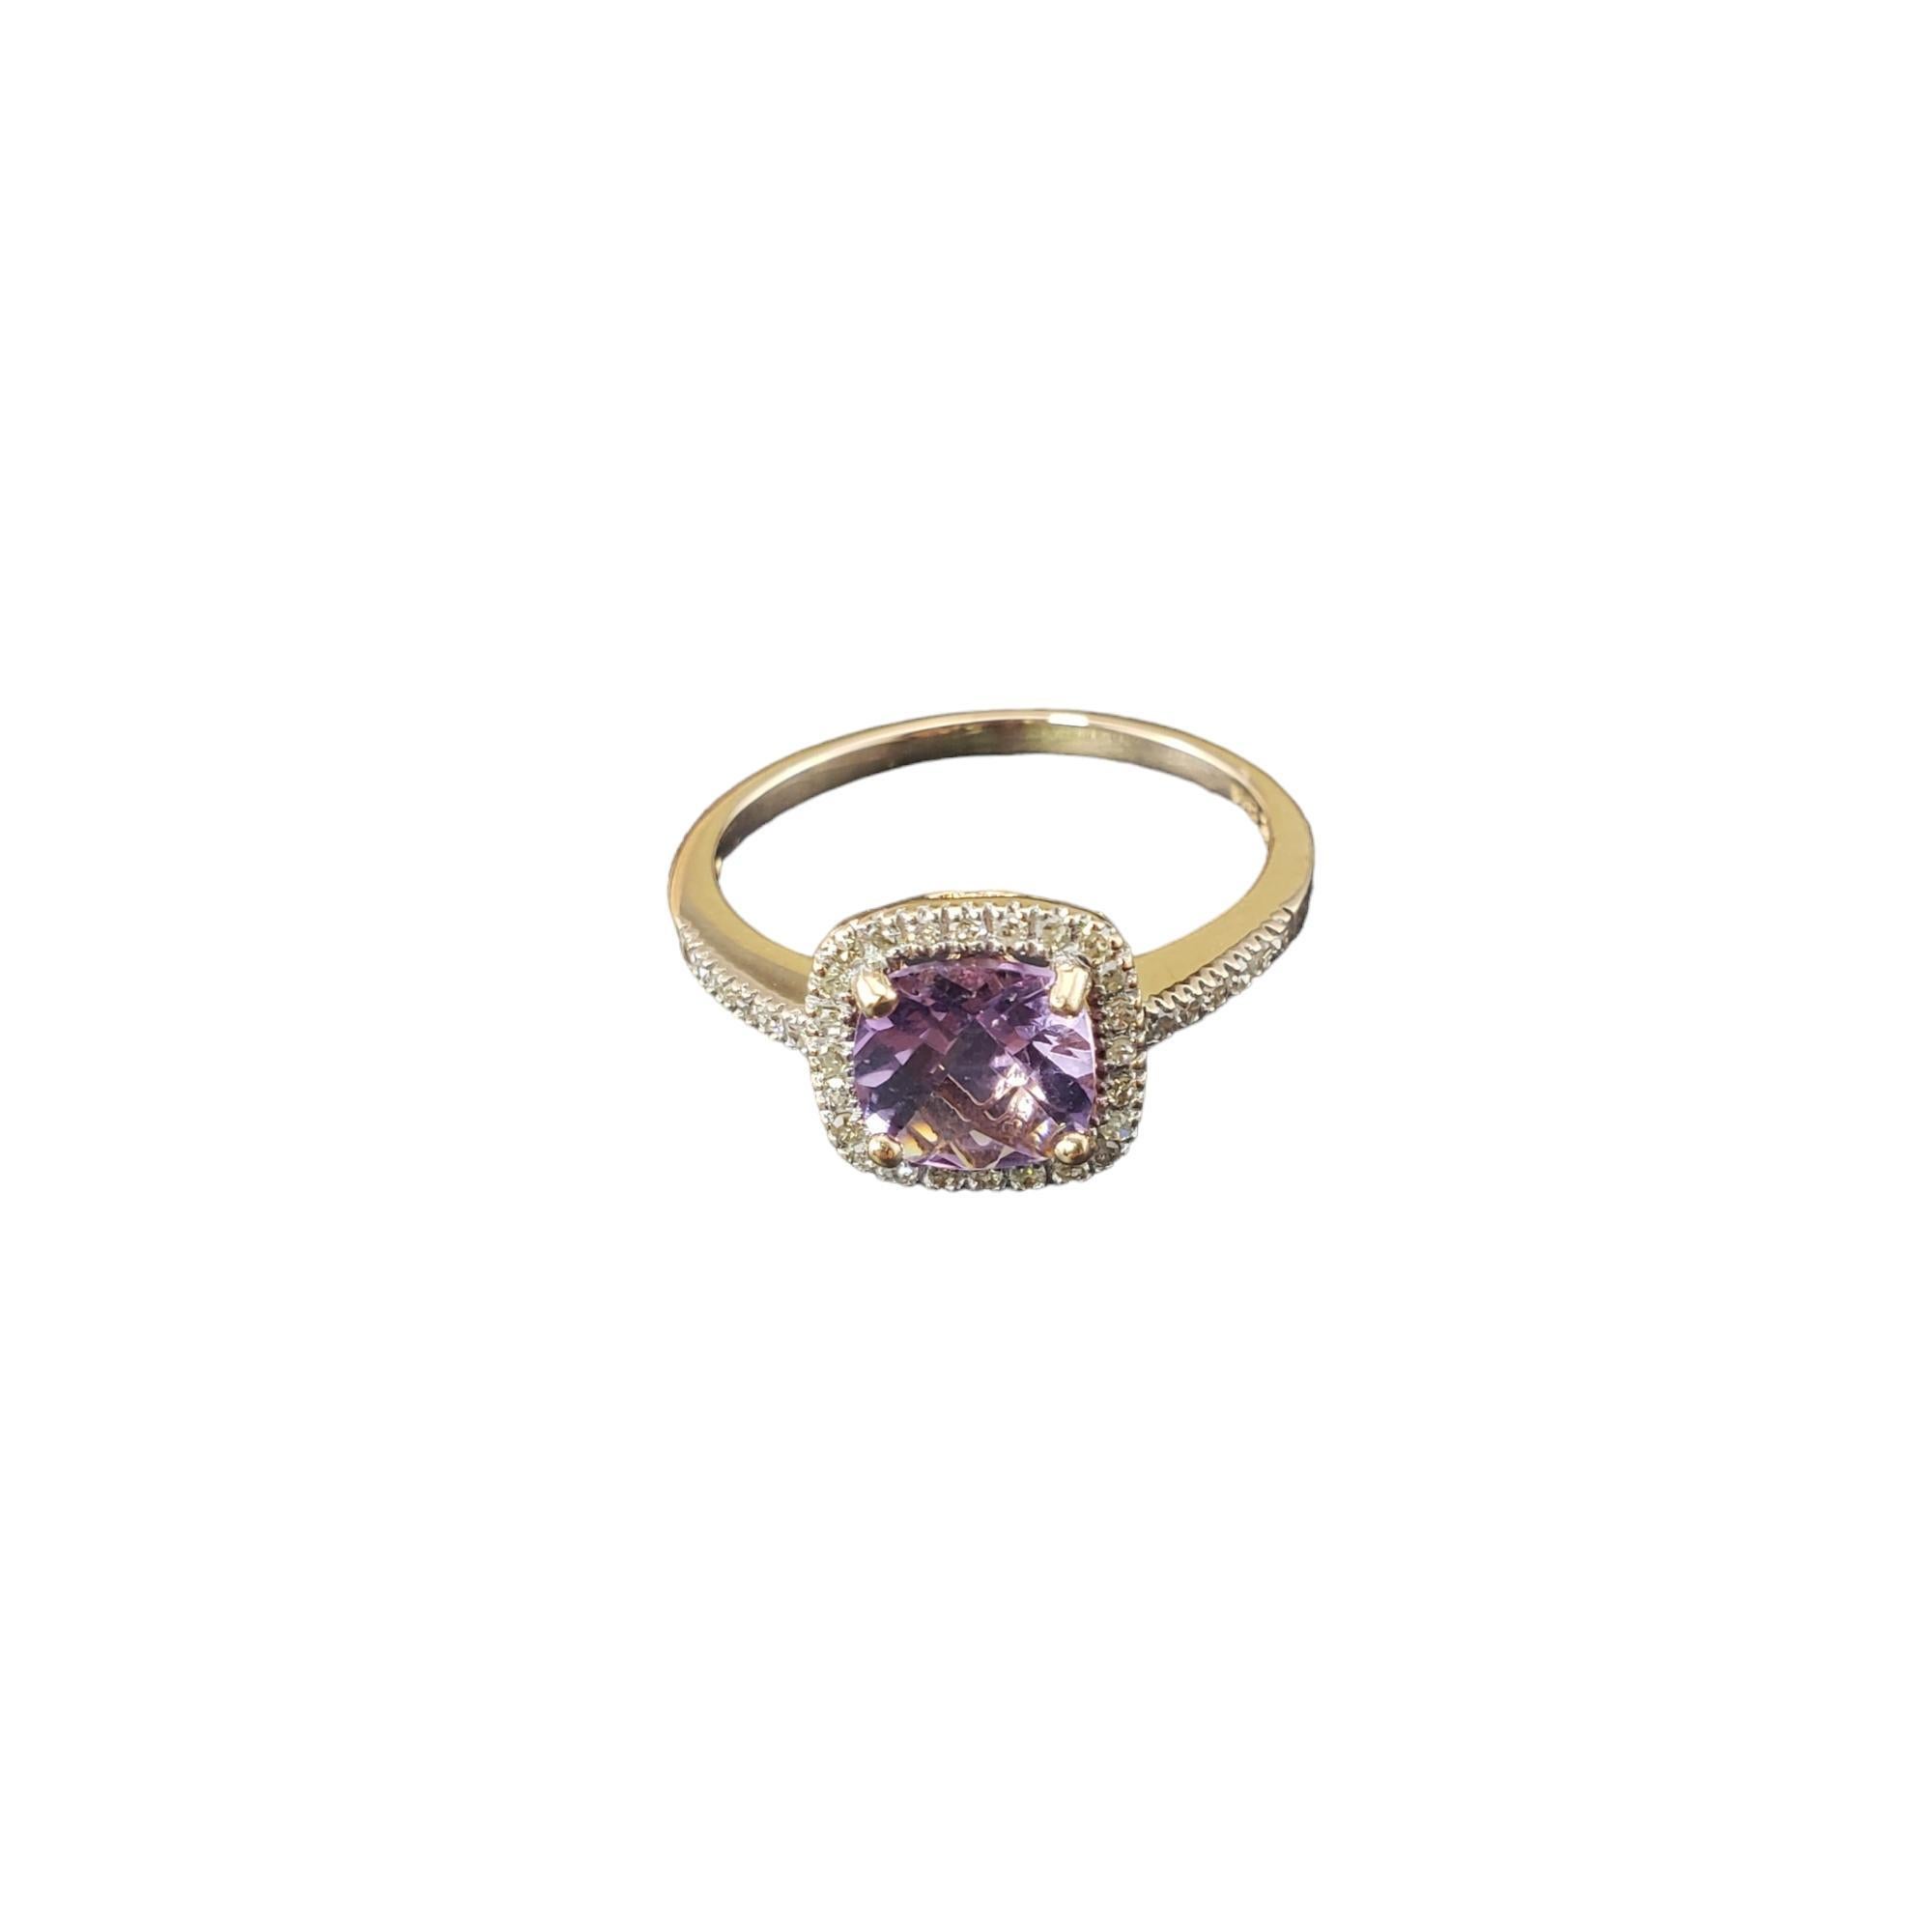 14 Karat Rose Gold Amethyst and Diamond Ring Size 8

This stunning ring features one cushion cut amethyst stone (7 mm x 7 mm) and 36 round single cut diamonds set in classic 14K rose gold.  

Width: 10 mm.  Shank: 1.5 mm.

Approximate total diamond